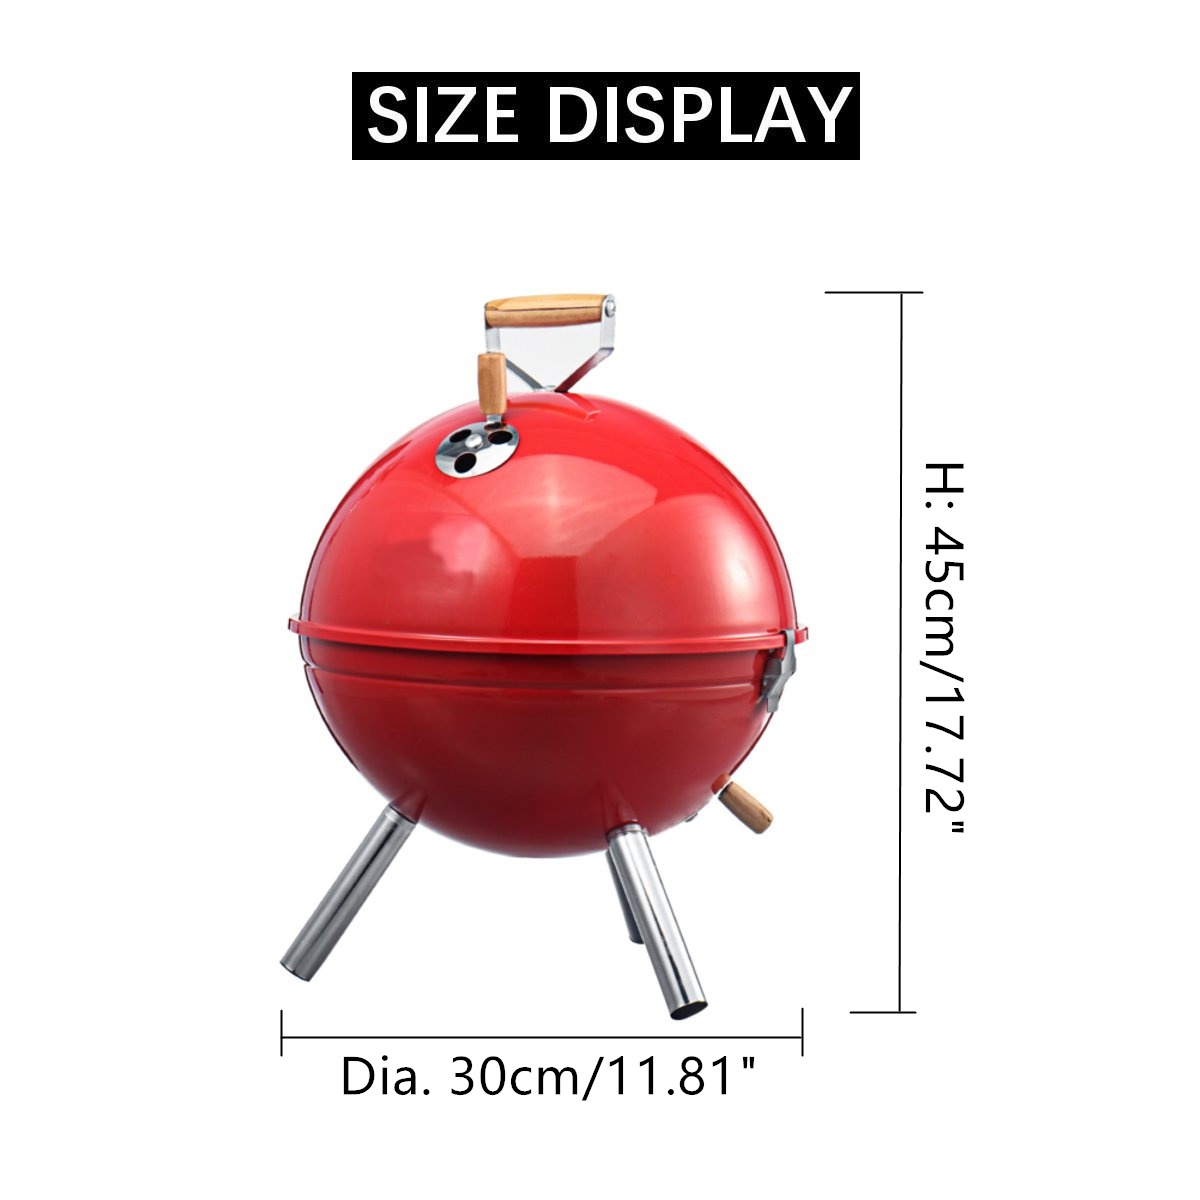 Portable-Iron-Kettle-BBQ-Grill-Outdoor-Camping-Travel-Charcoal-Stove-With-Vent-1613136